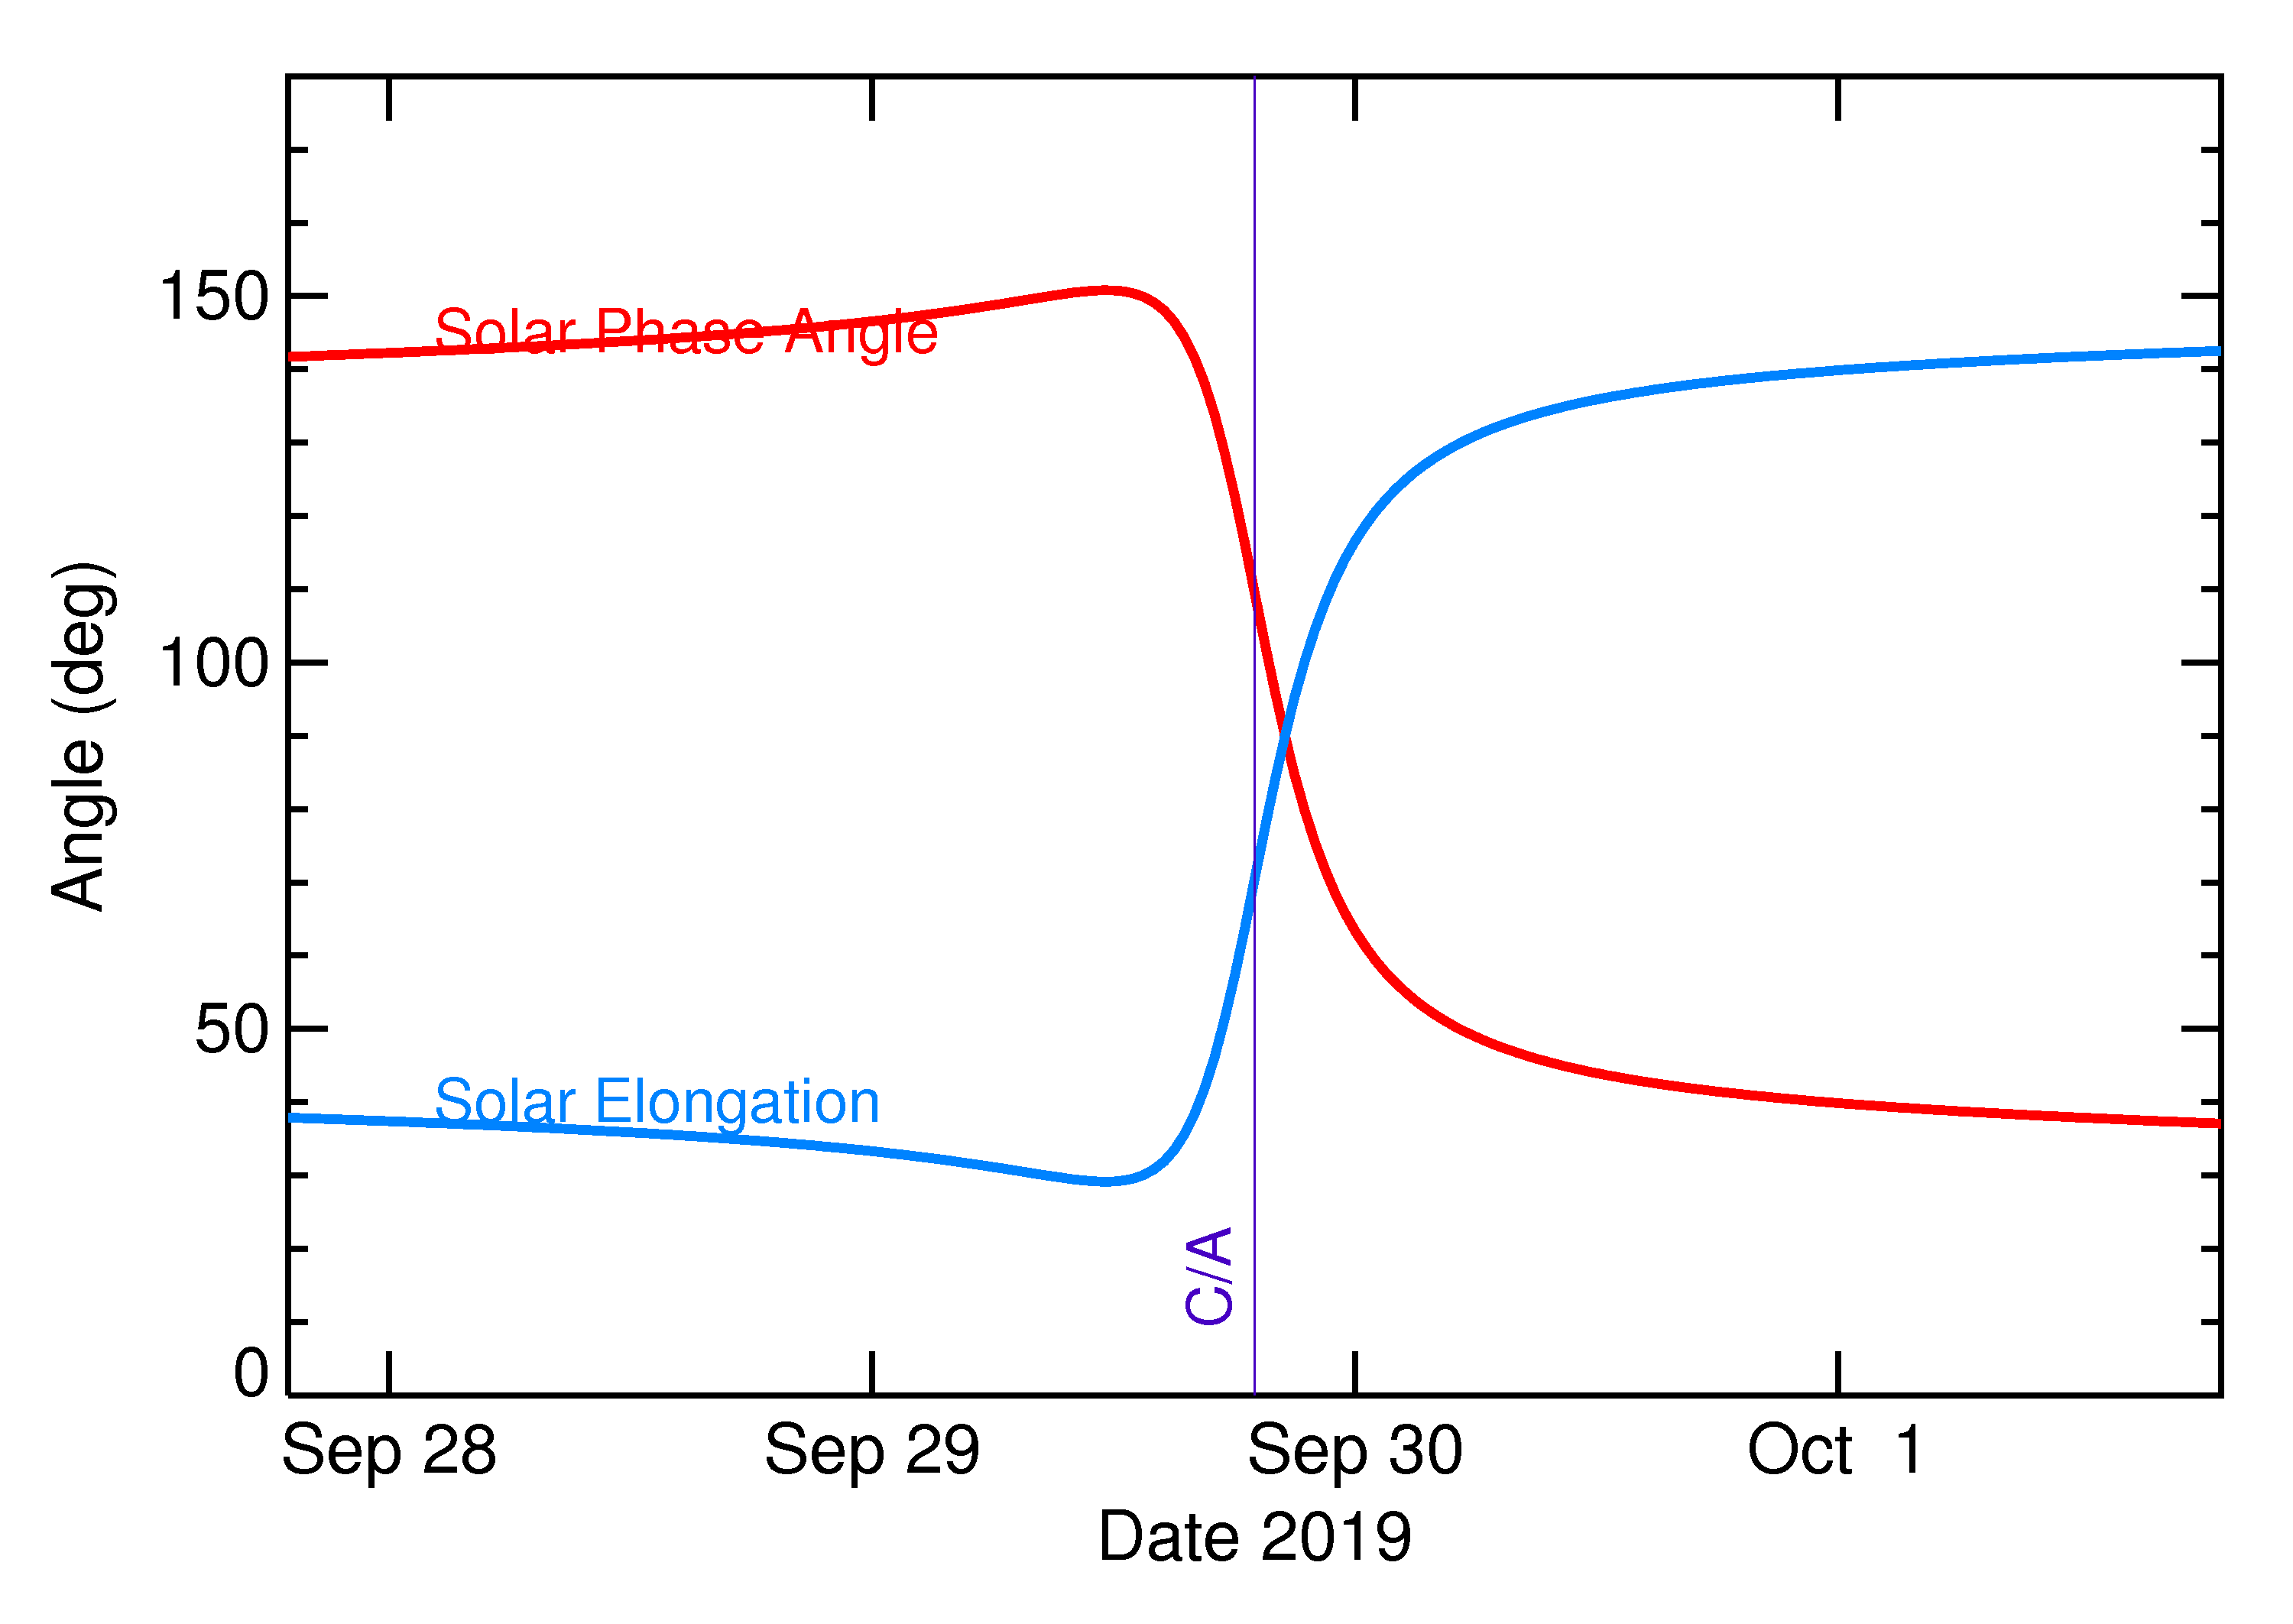 Solar Elongation and Solar Phase Angle of 2019 TD in the days around closest approach